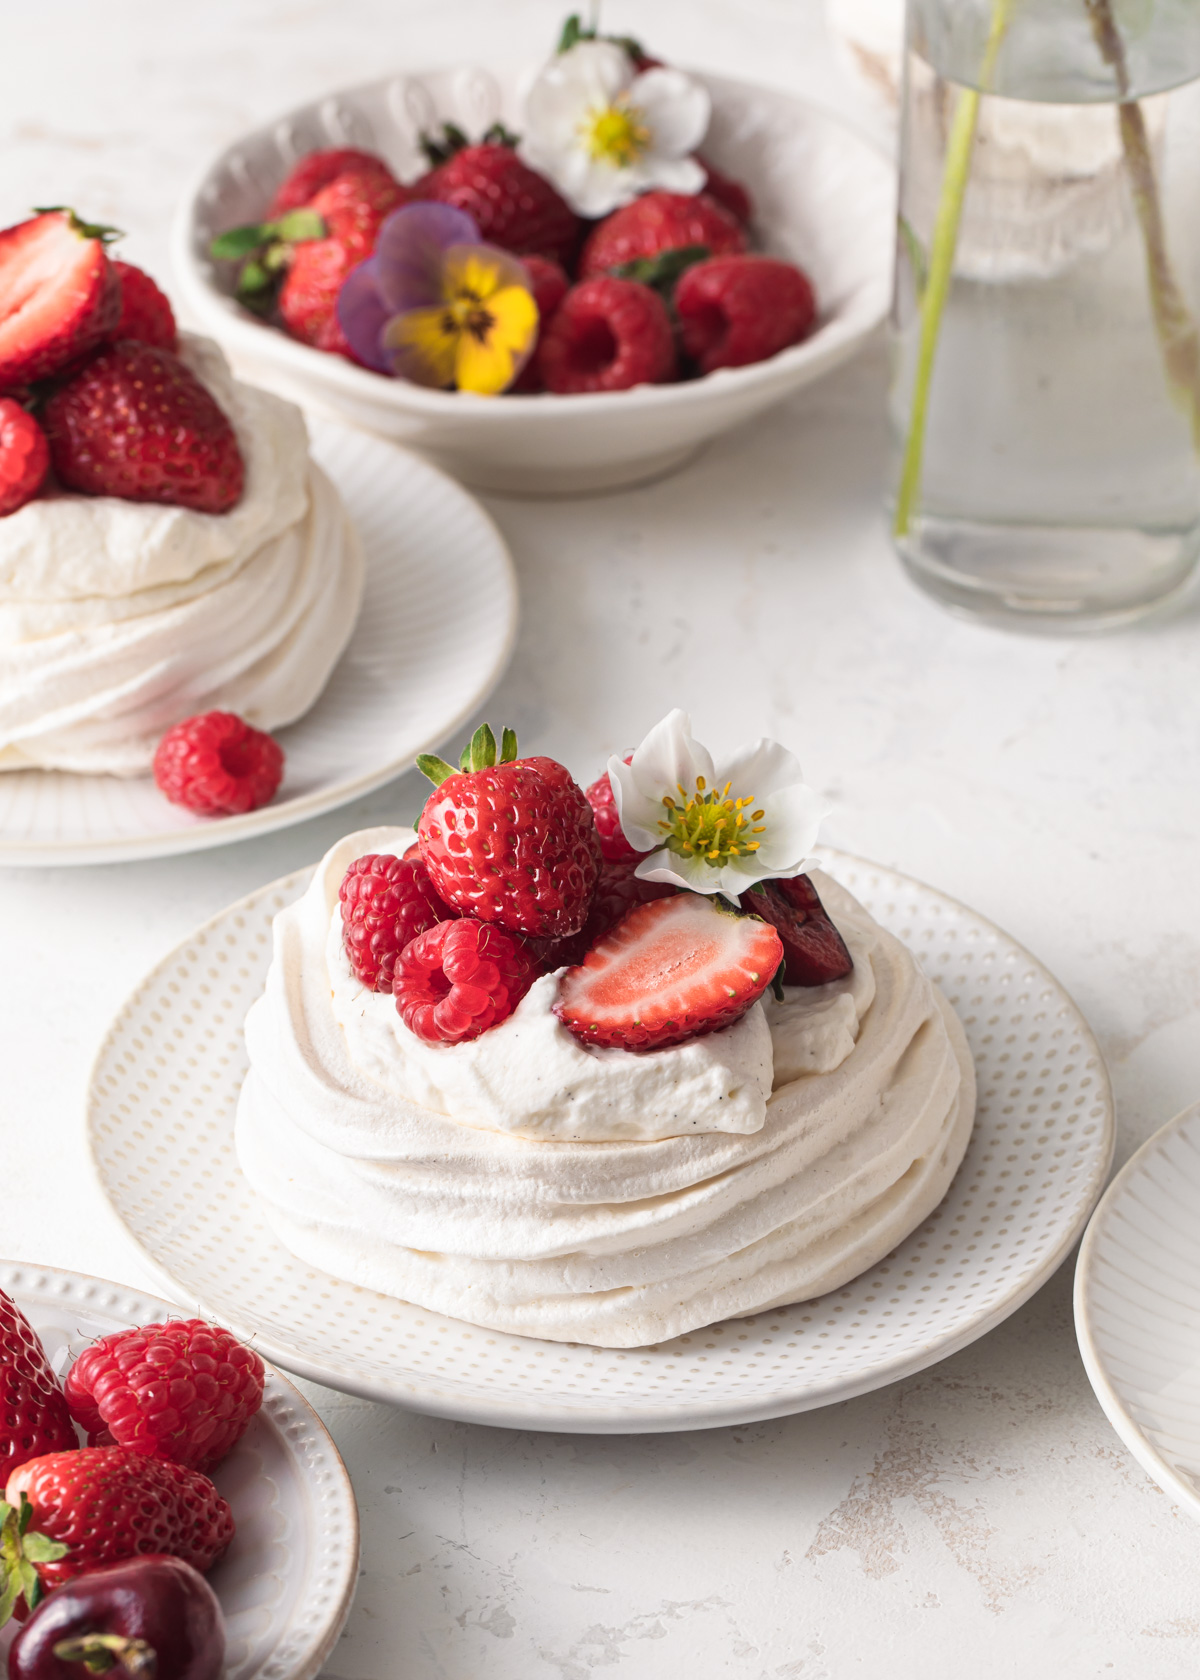 A close-up image of a mini pavlova nest that's been filled with whipped cream and fresh summer berries.
